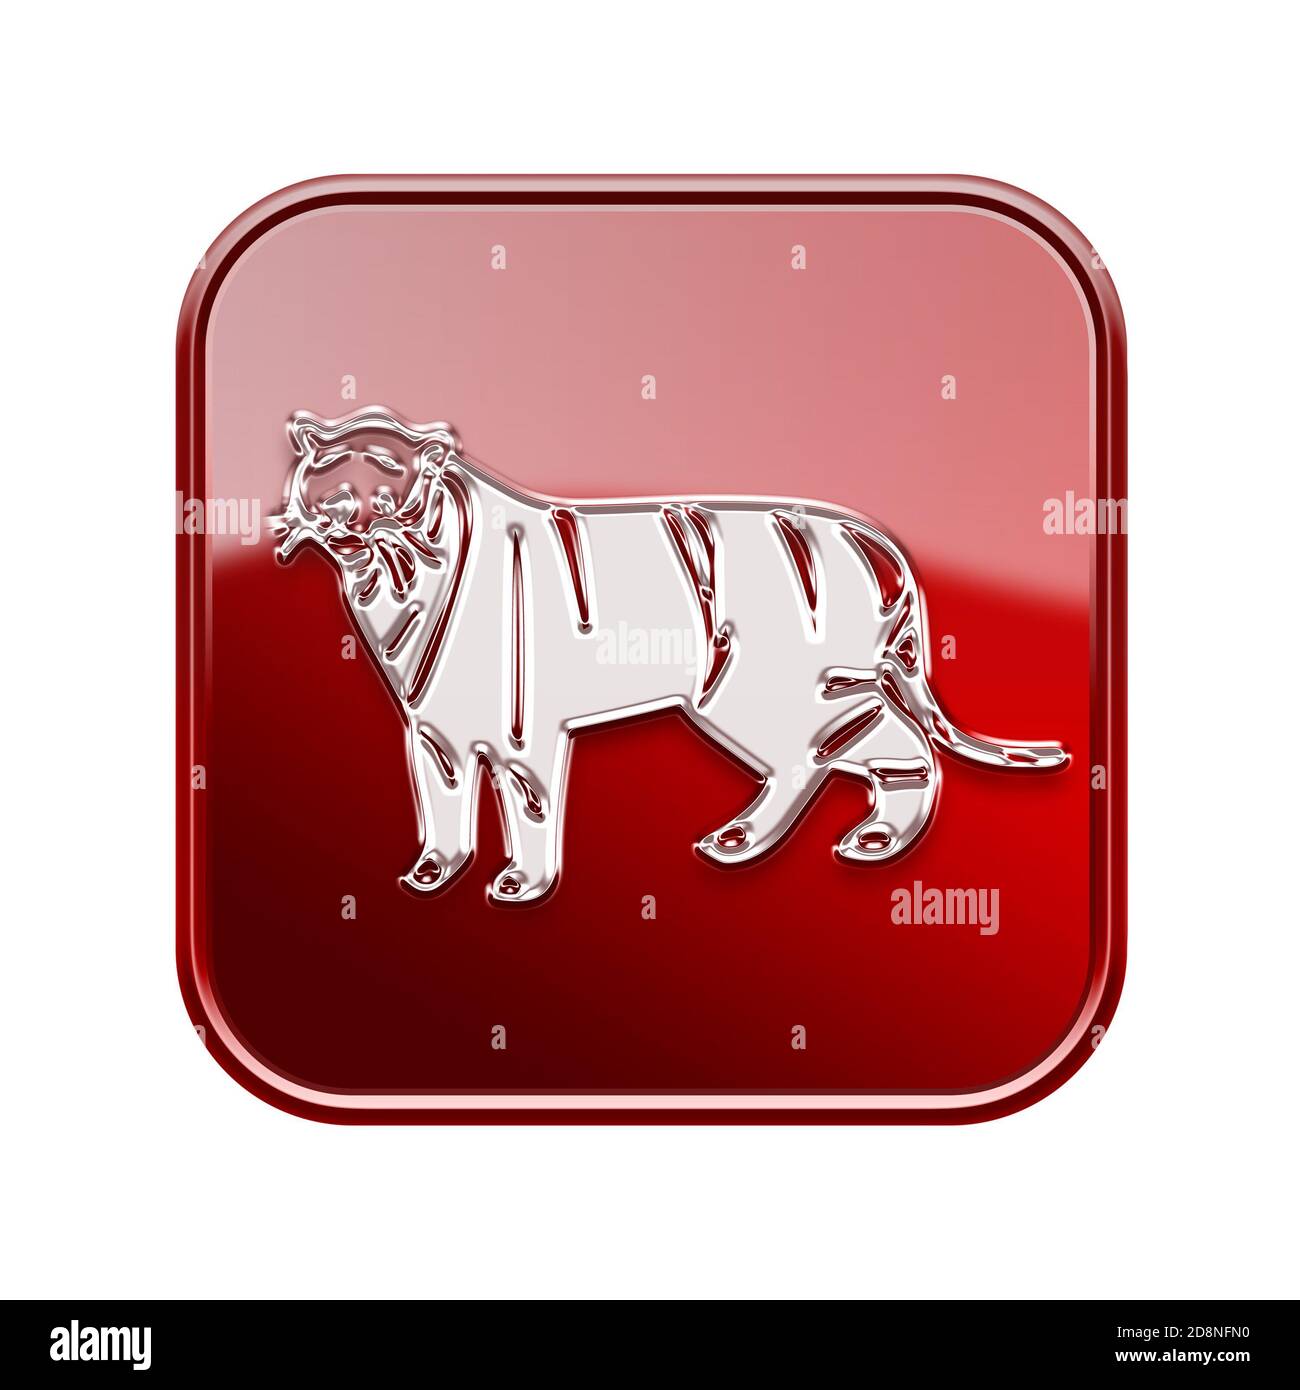 Tiger Zodiac icon red, isolated on white background. Stock Photo